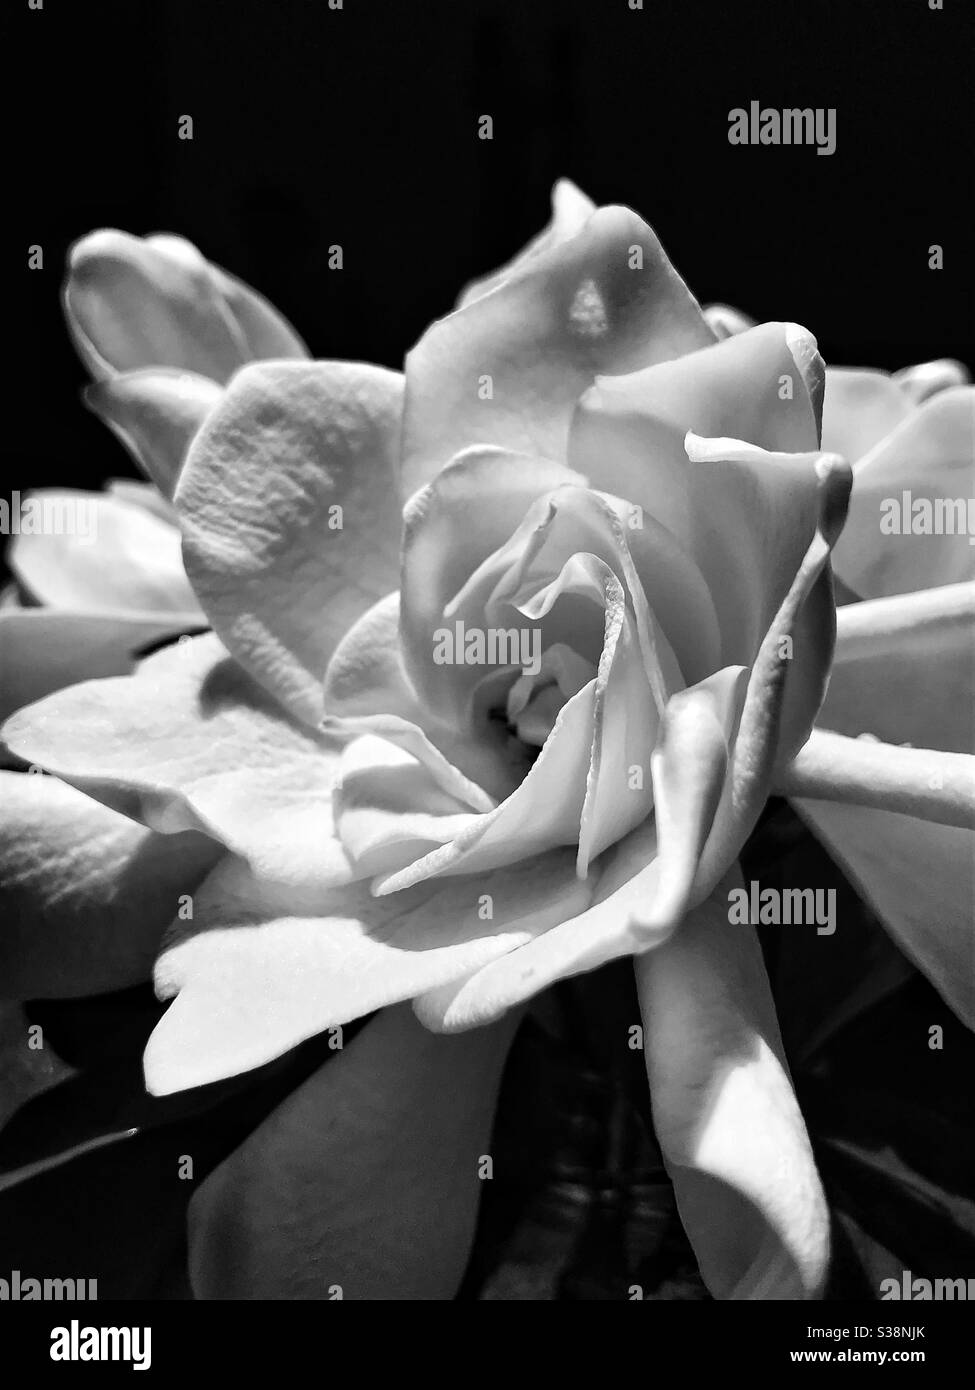 Gardenia flower close up in black and white with dramatic lighting Stock Photo